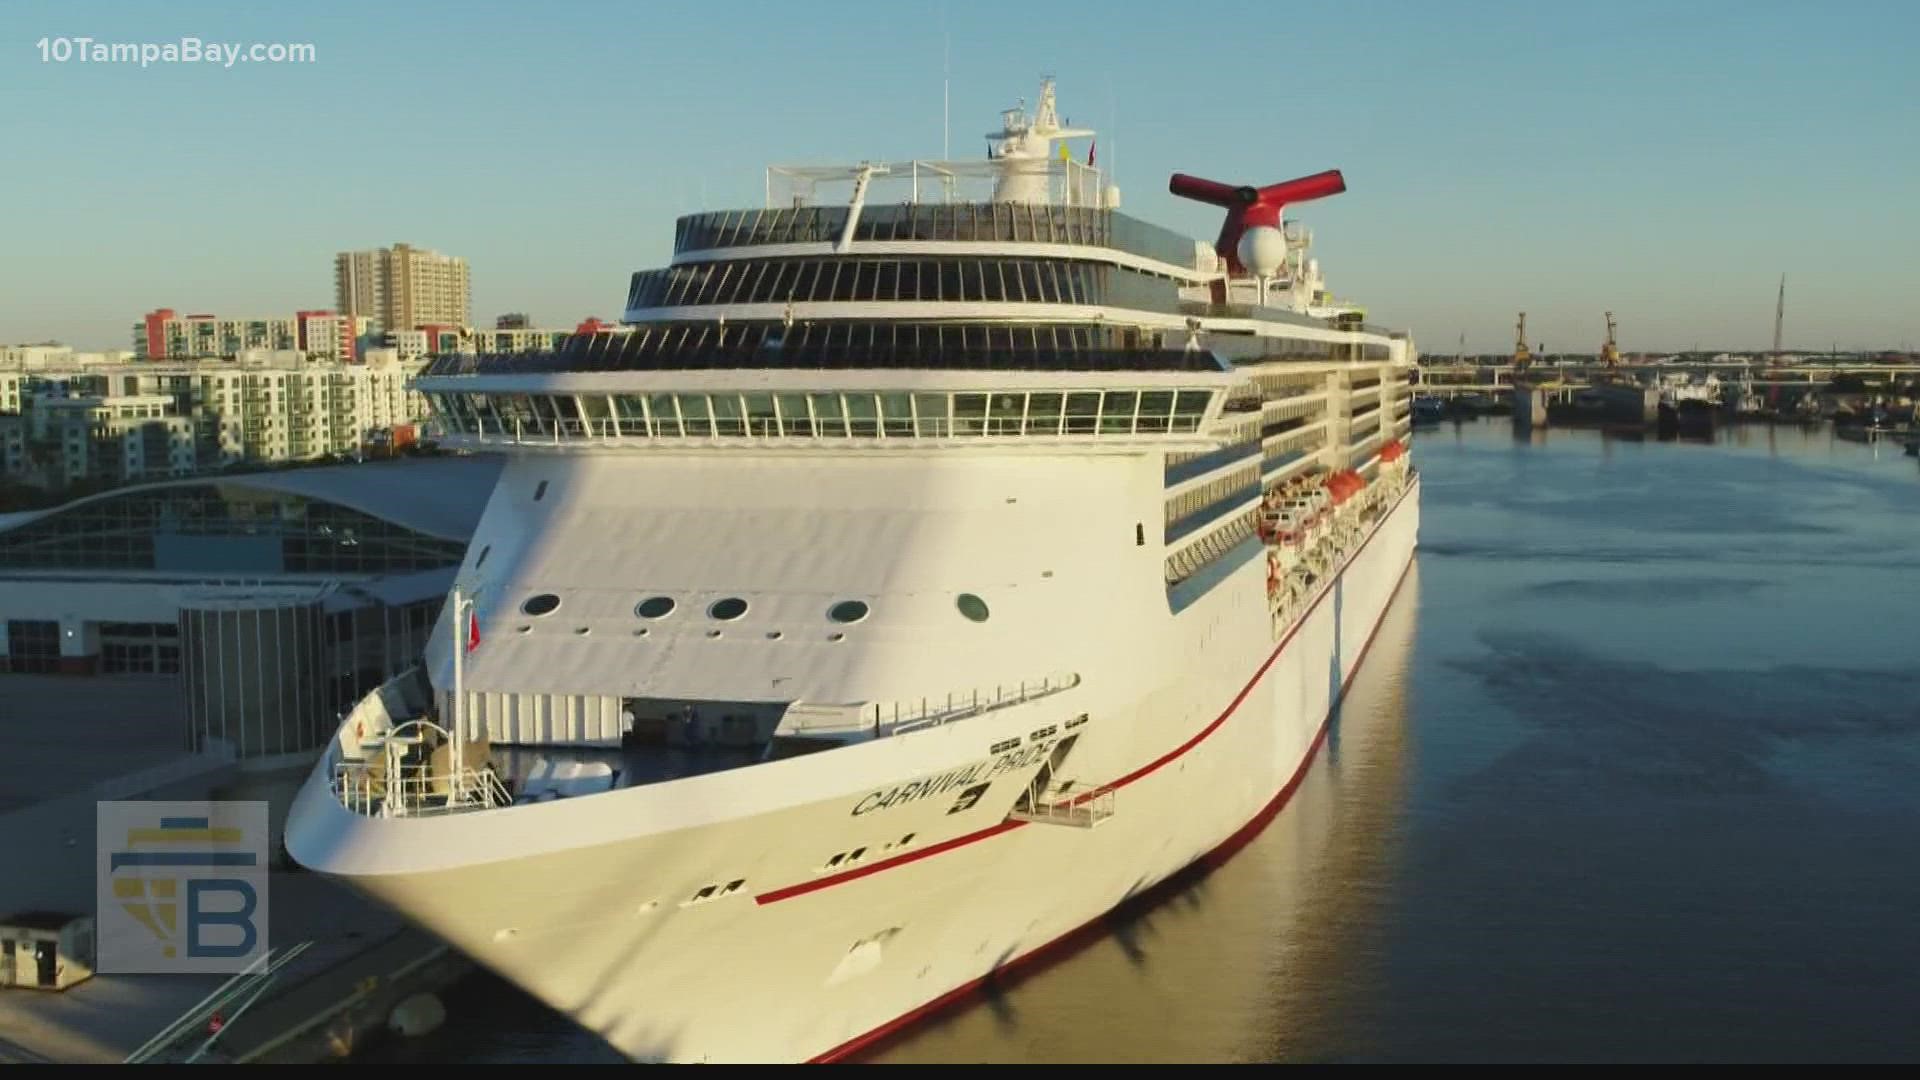 After nearly two years, cruise ships from the Carnival Cruise Line are setting sail yet again from Tampa.